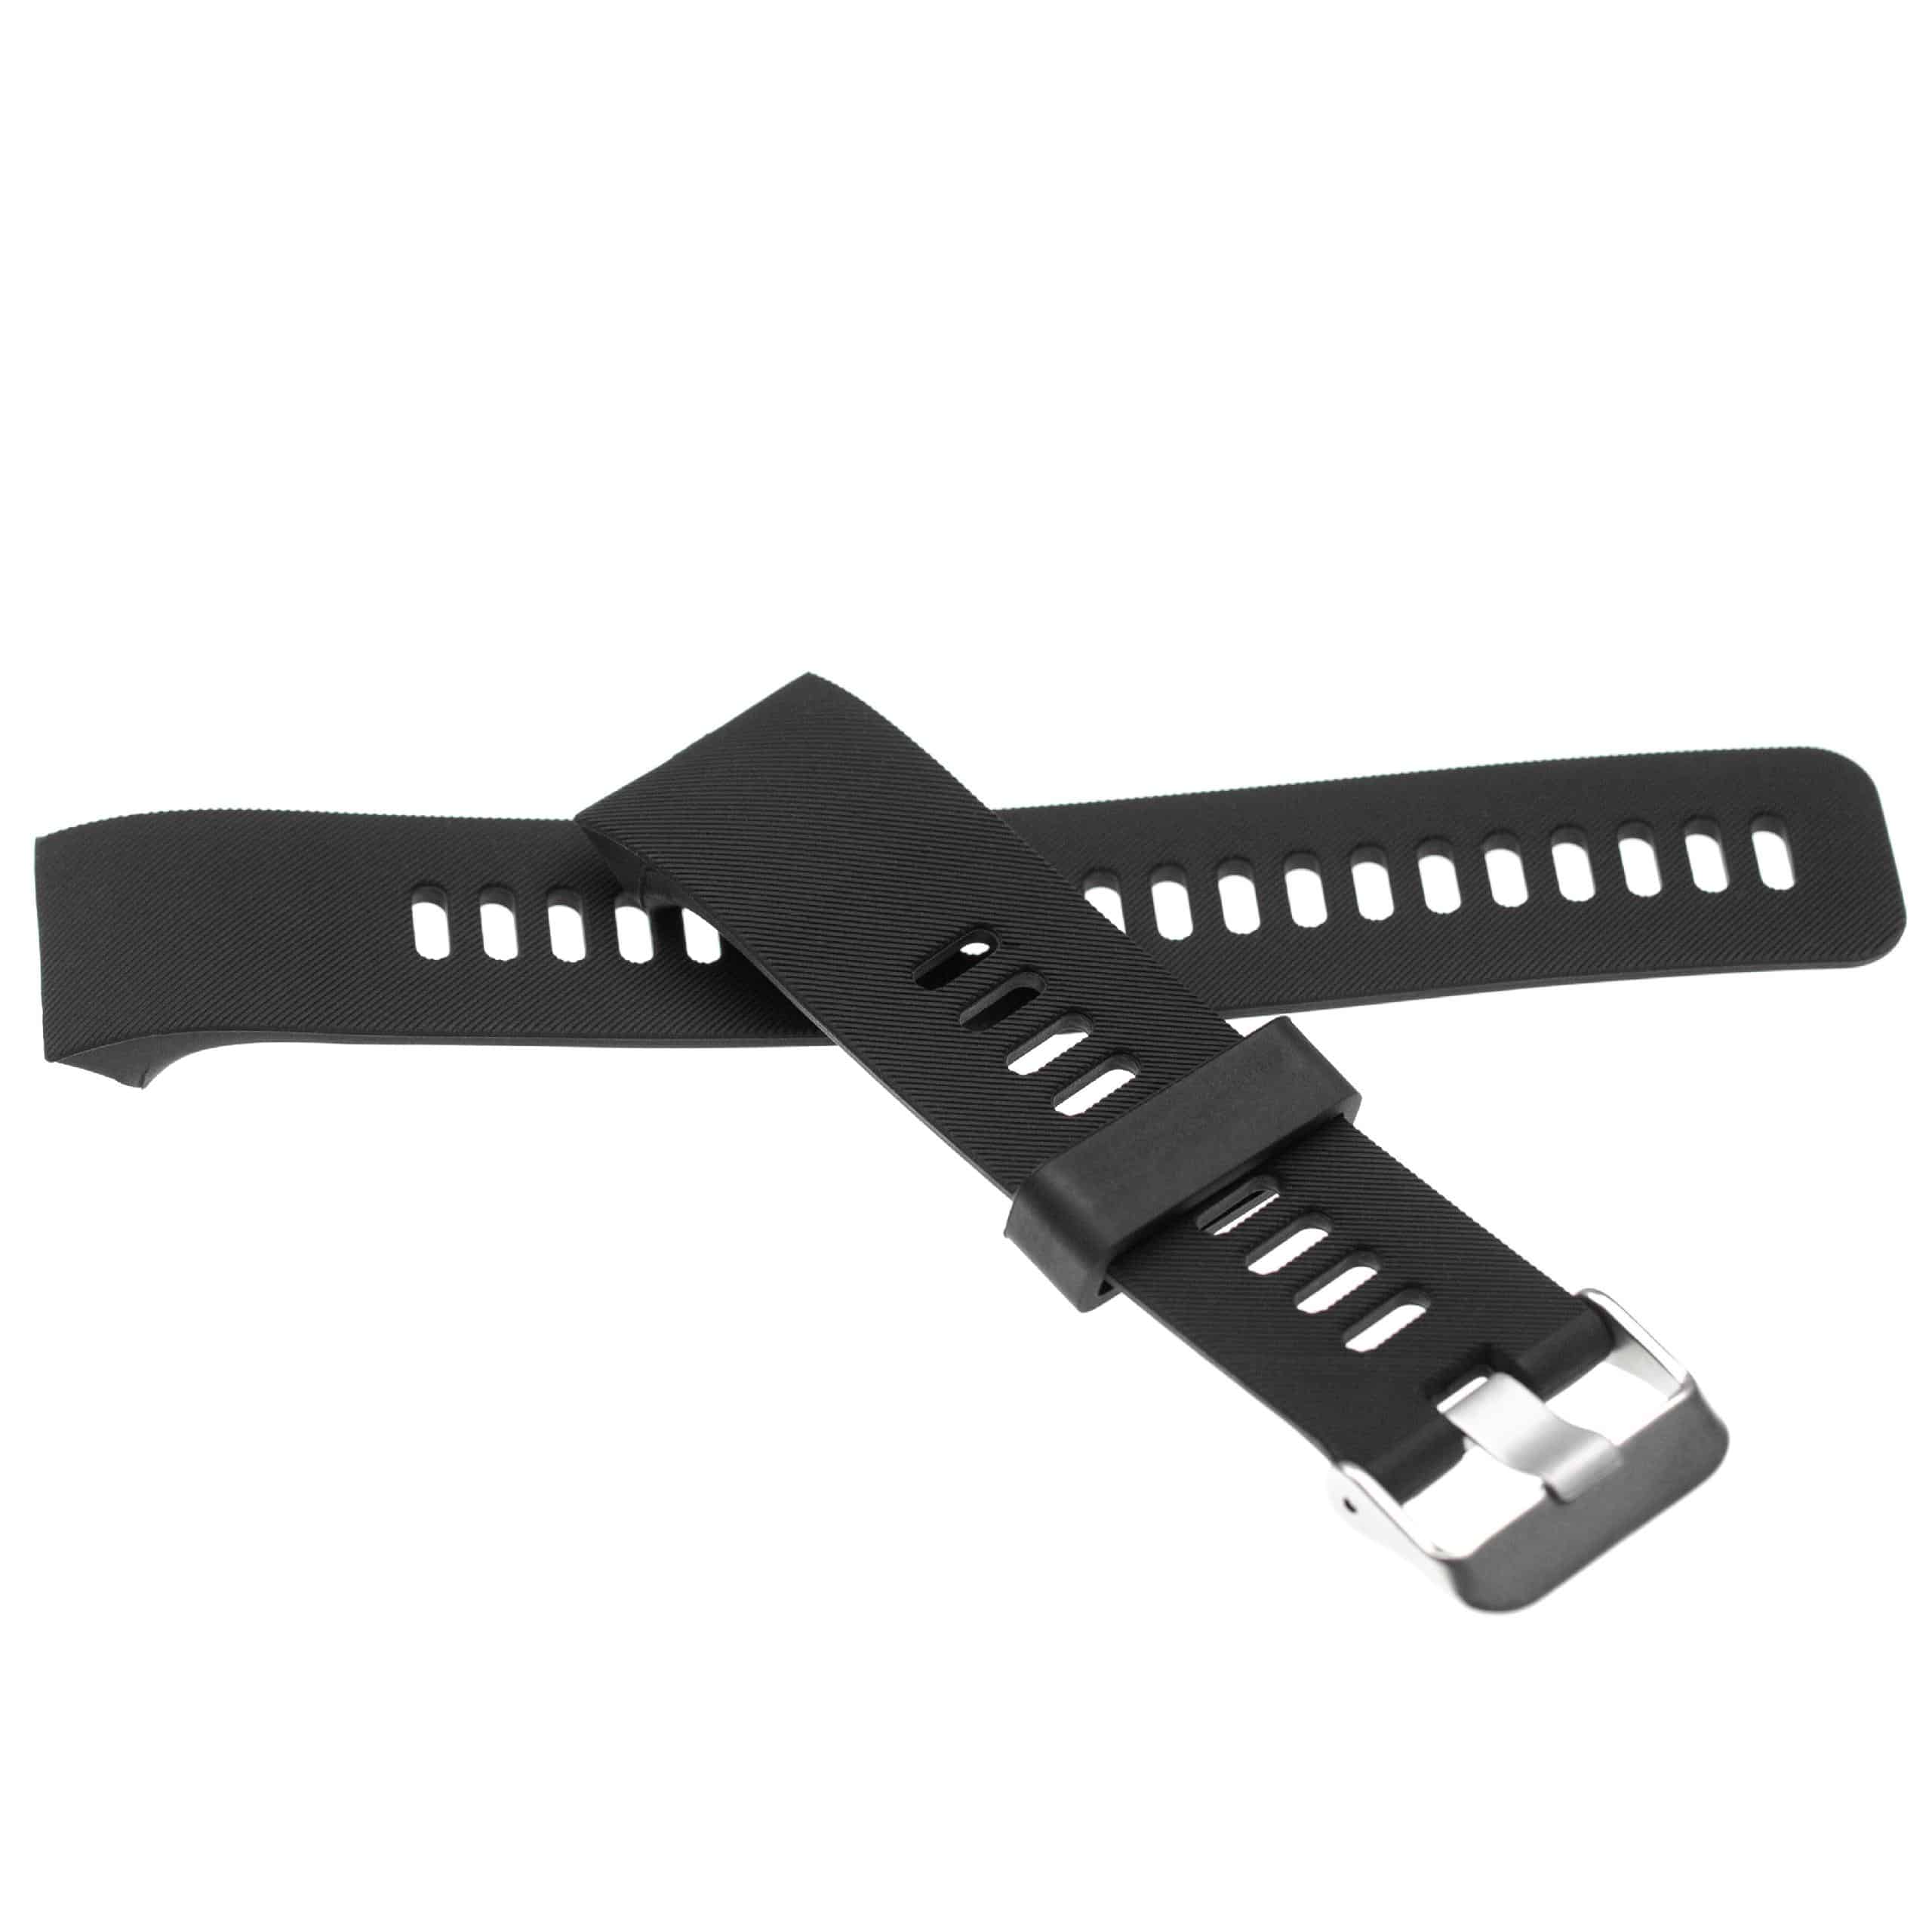 wristband for Garmin Forerunner Smartwatch - 13.5 + 9.4 cm long, 23mm wide, silicone, black